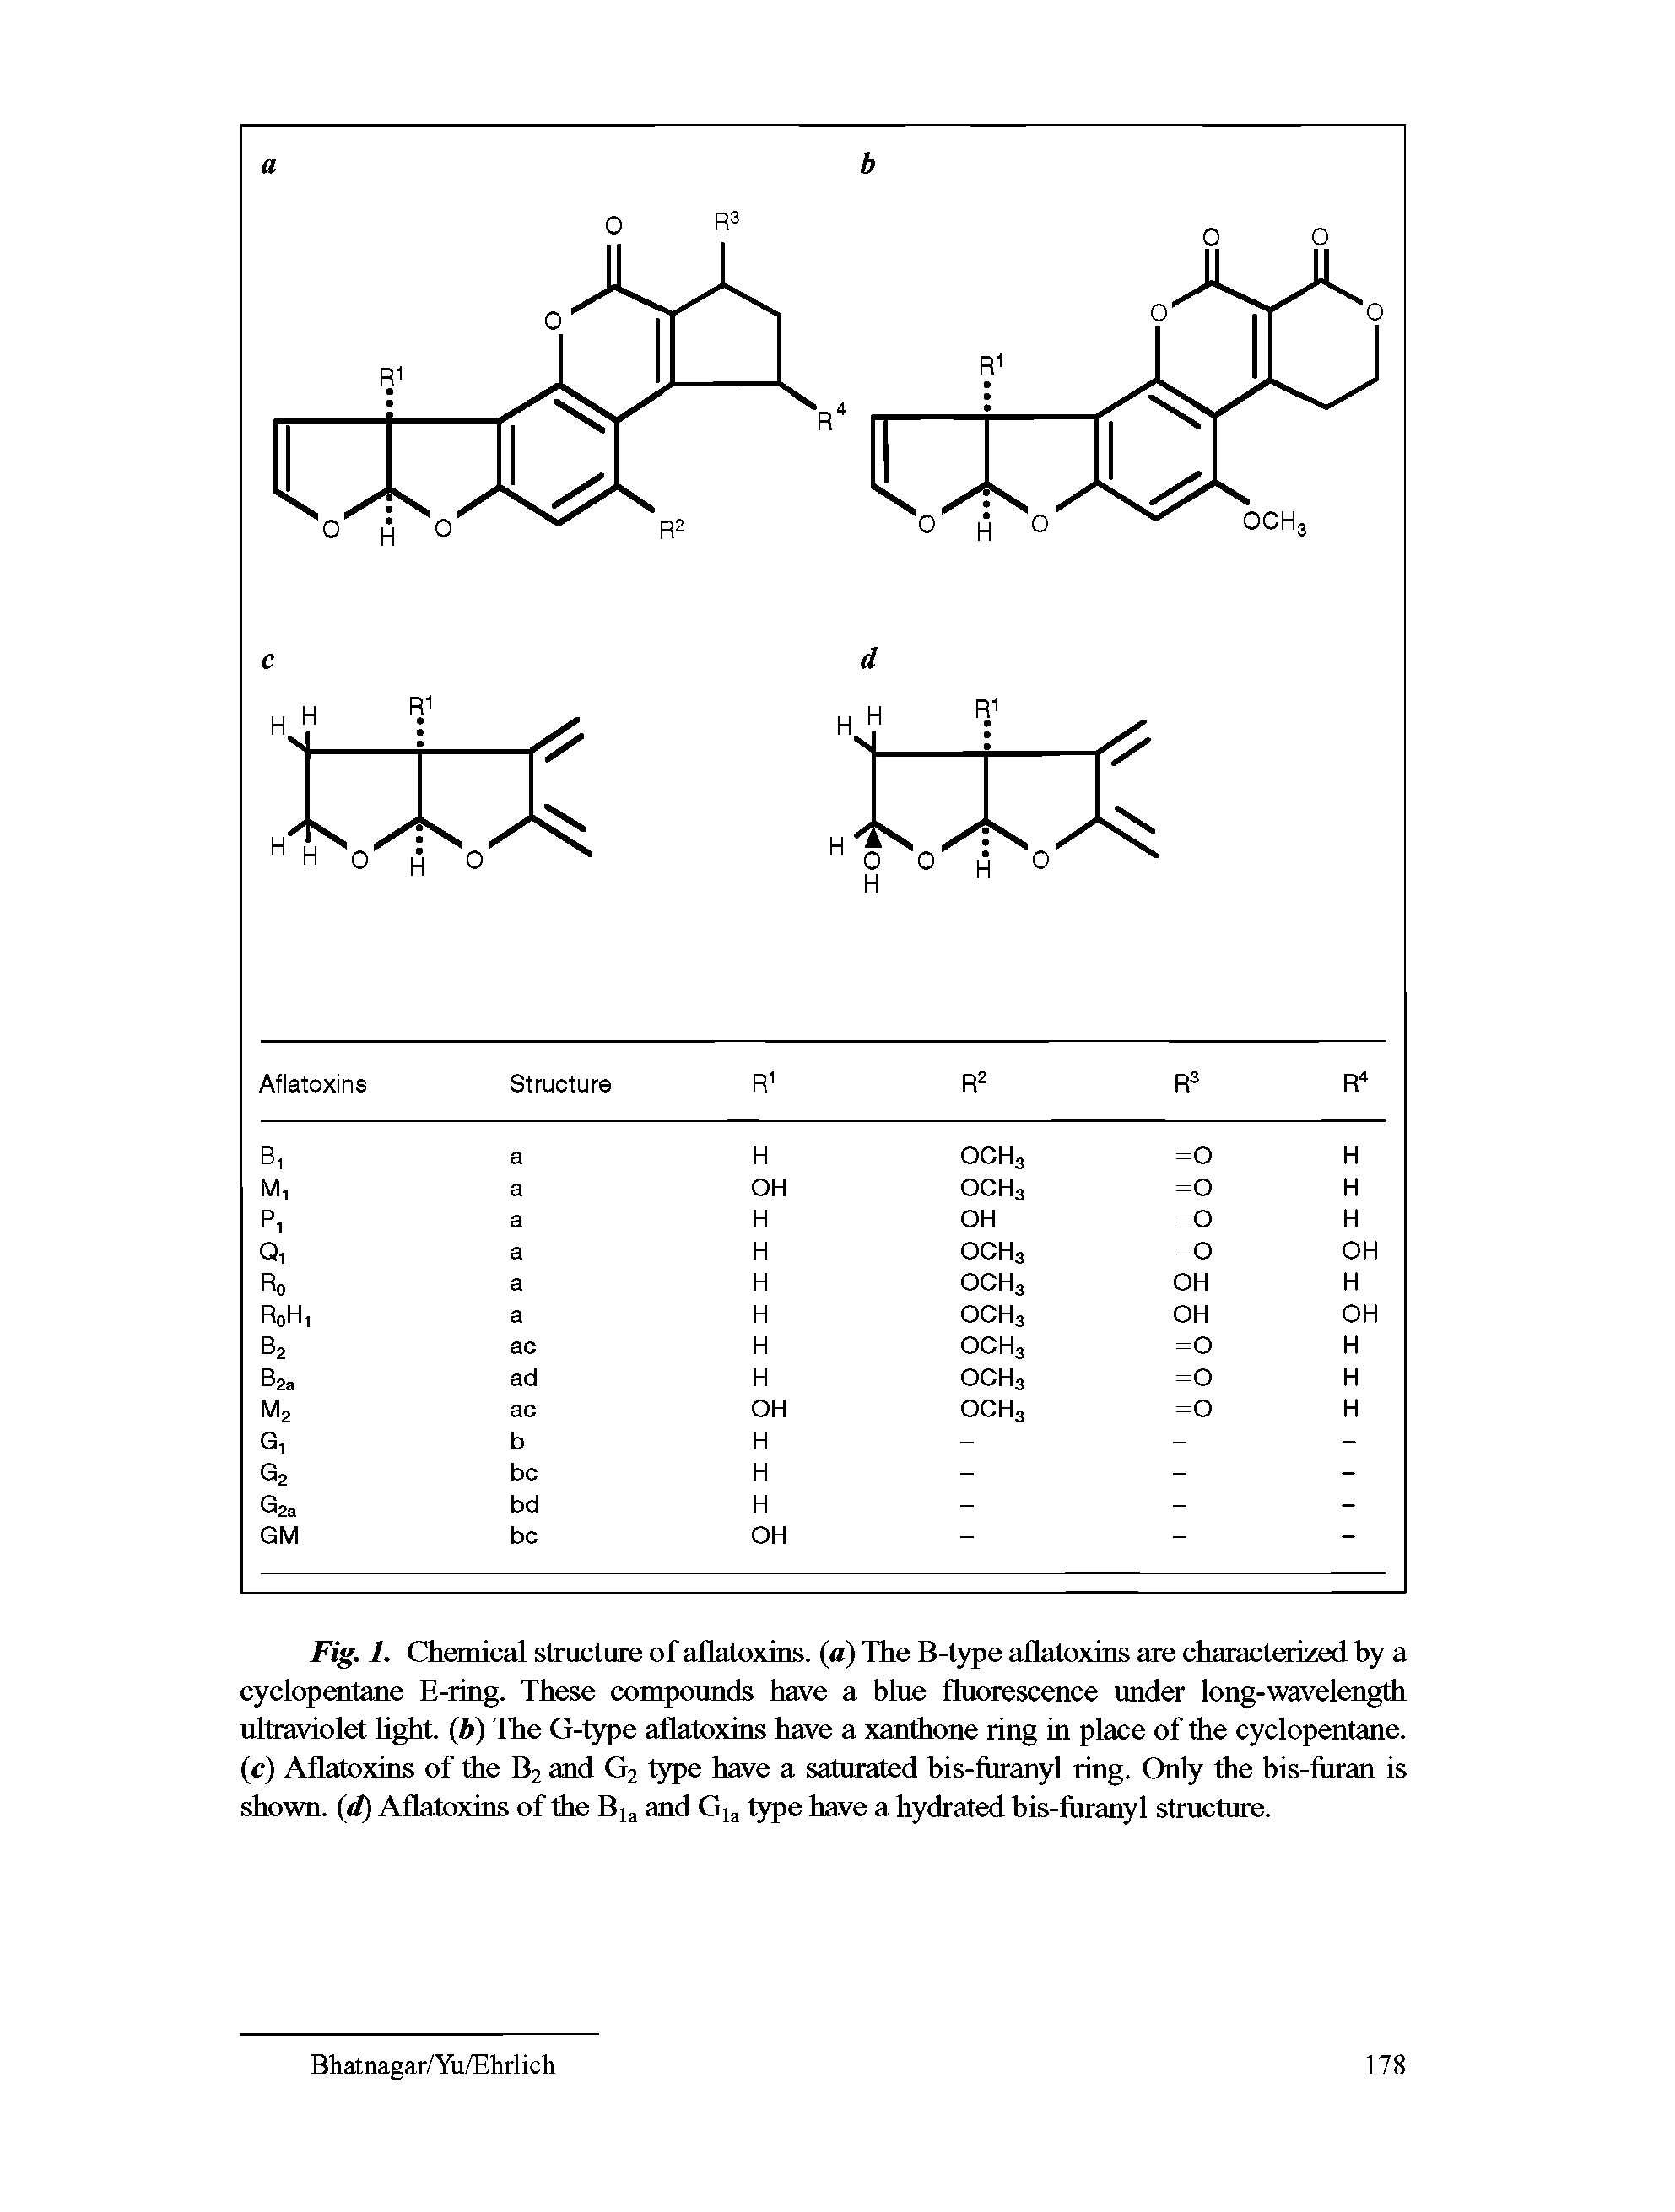 Fig. 1. Chemical structure of aflatoxins. (a) The B-type aflatoxins are characterized hy a cyclopeutane E-ring. These compoimds have a hlue fluorescence under long-wavelength ultraviolet hght (h) The G-type aflatoxins have a xanthone ring in place of the cyclopentane, (c) Aflatoxins of the B2 and G2 type have a saturated bis-furanyl ring. Only the bis-firran is shown, (d) Aflatoxins of the Bi and Gi type have a hydrated his-furanyl structure.